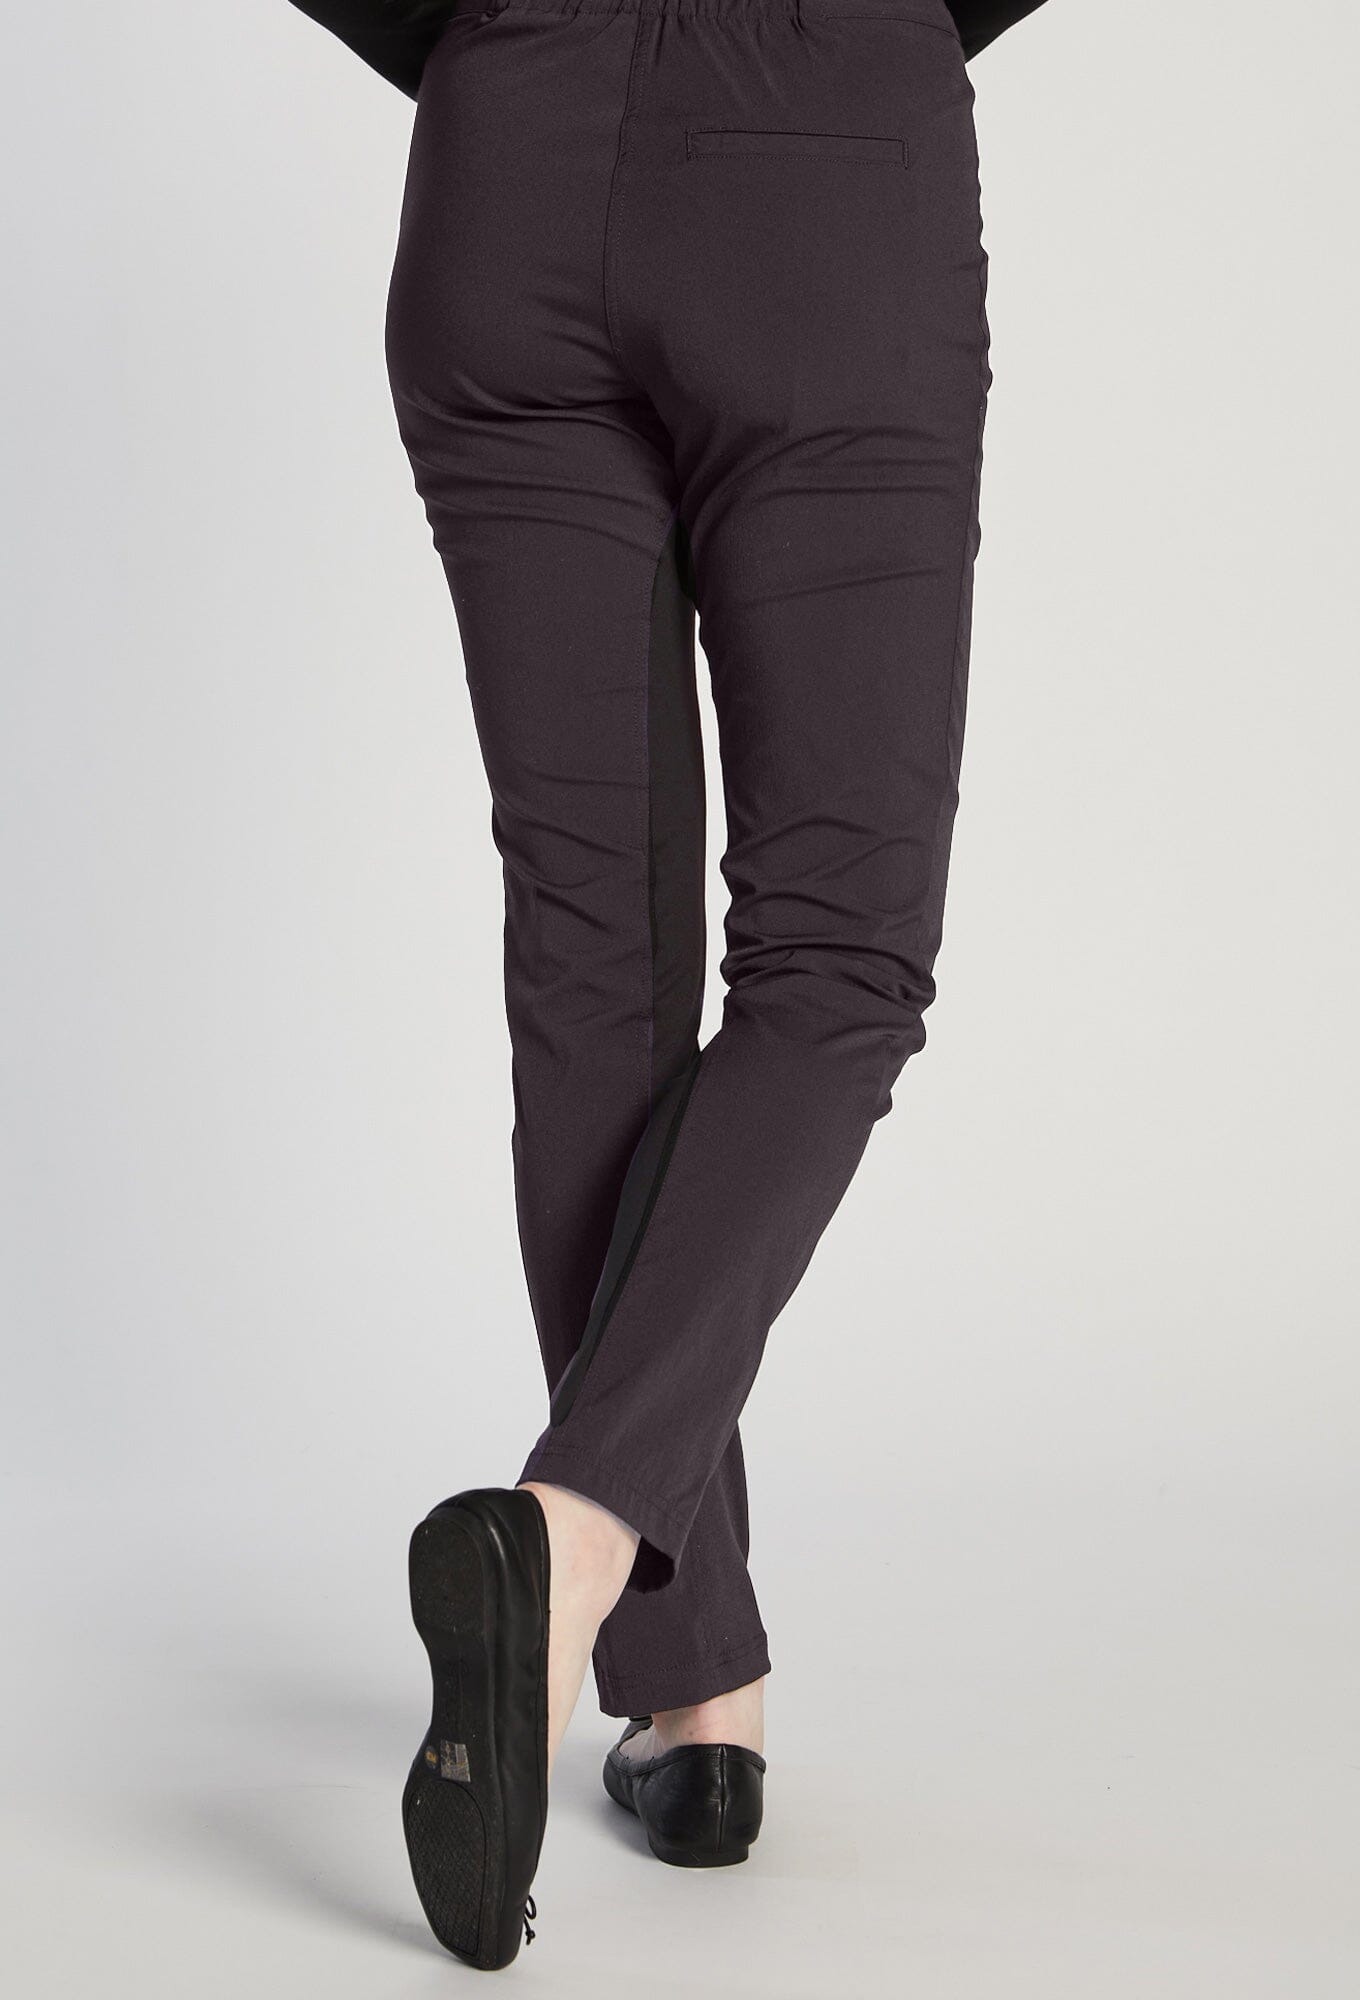 Limited Edition Ibiza Pant in Slate Grey